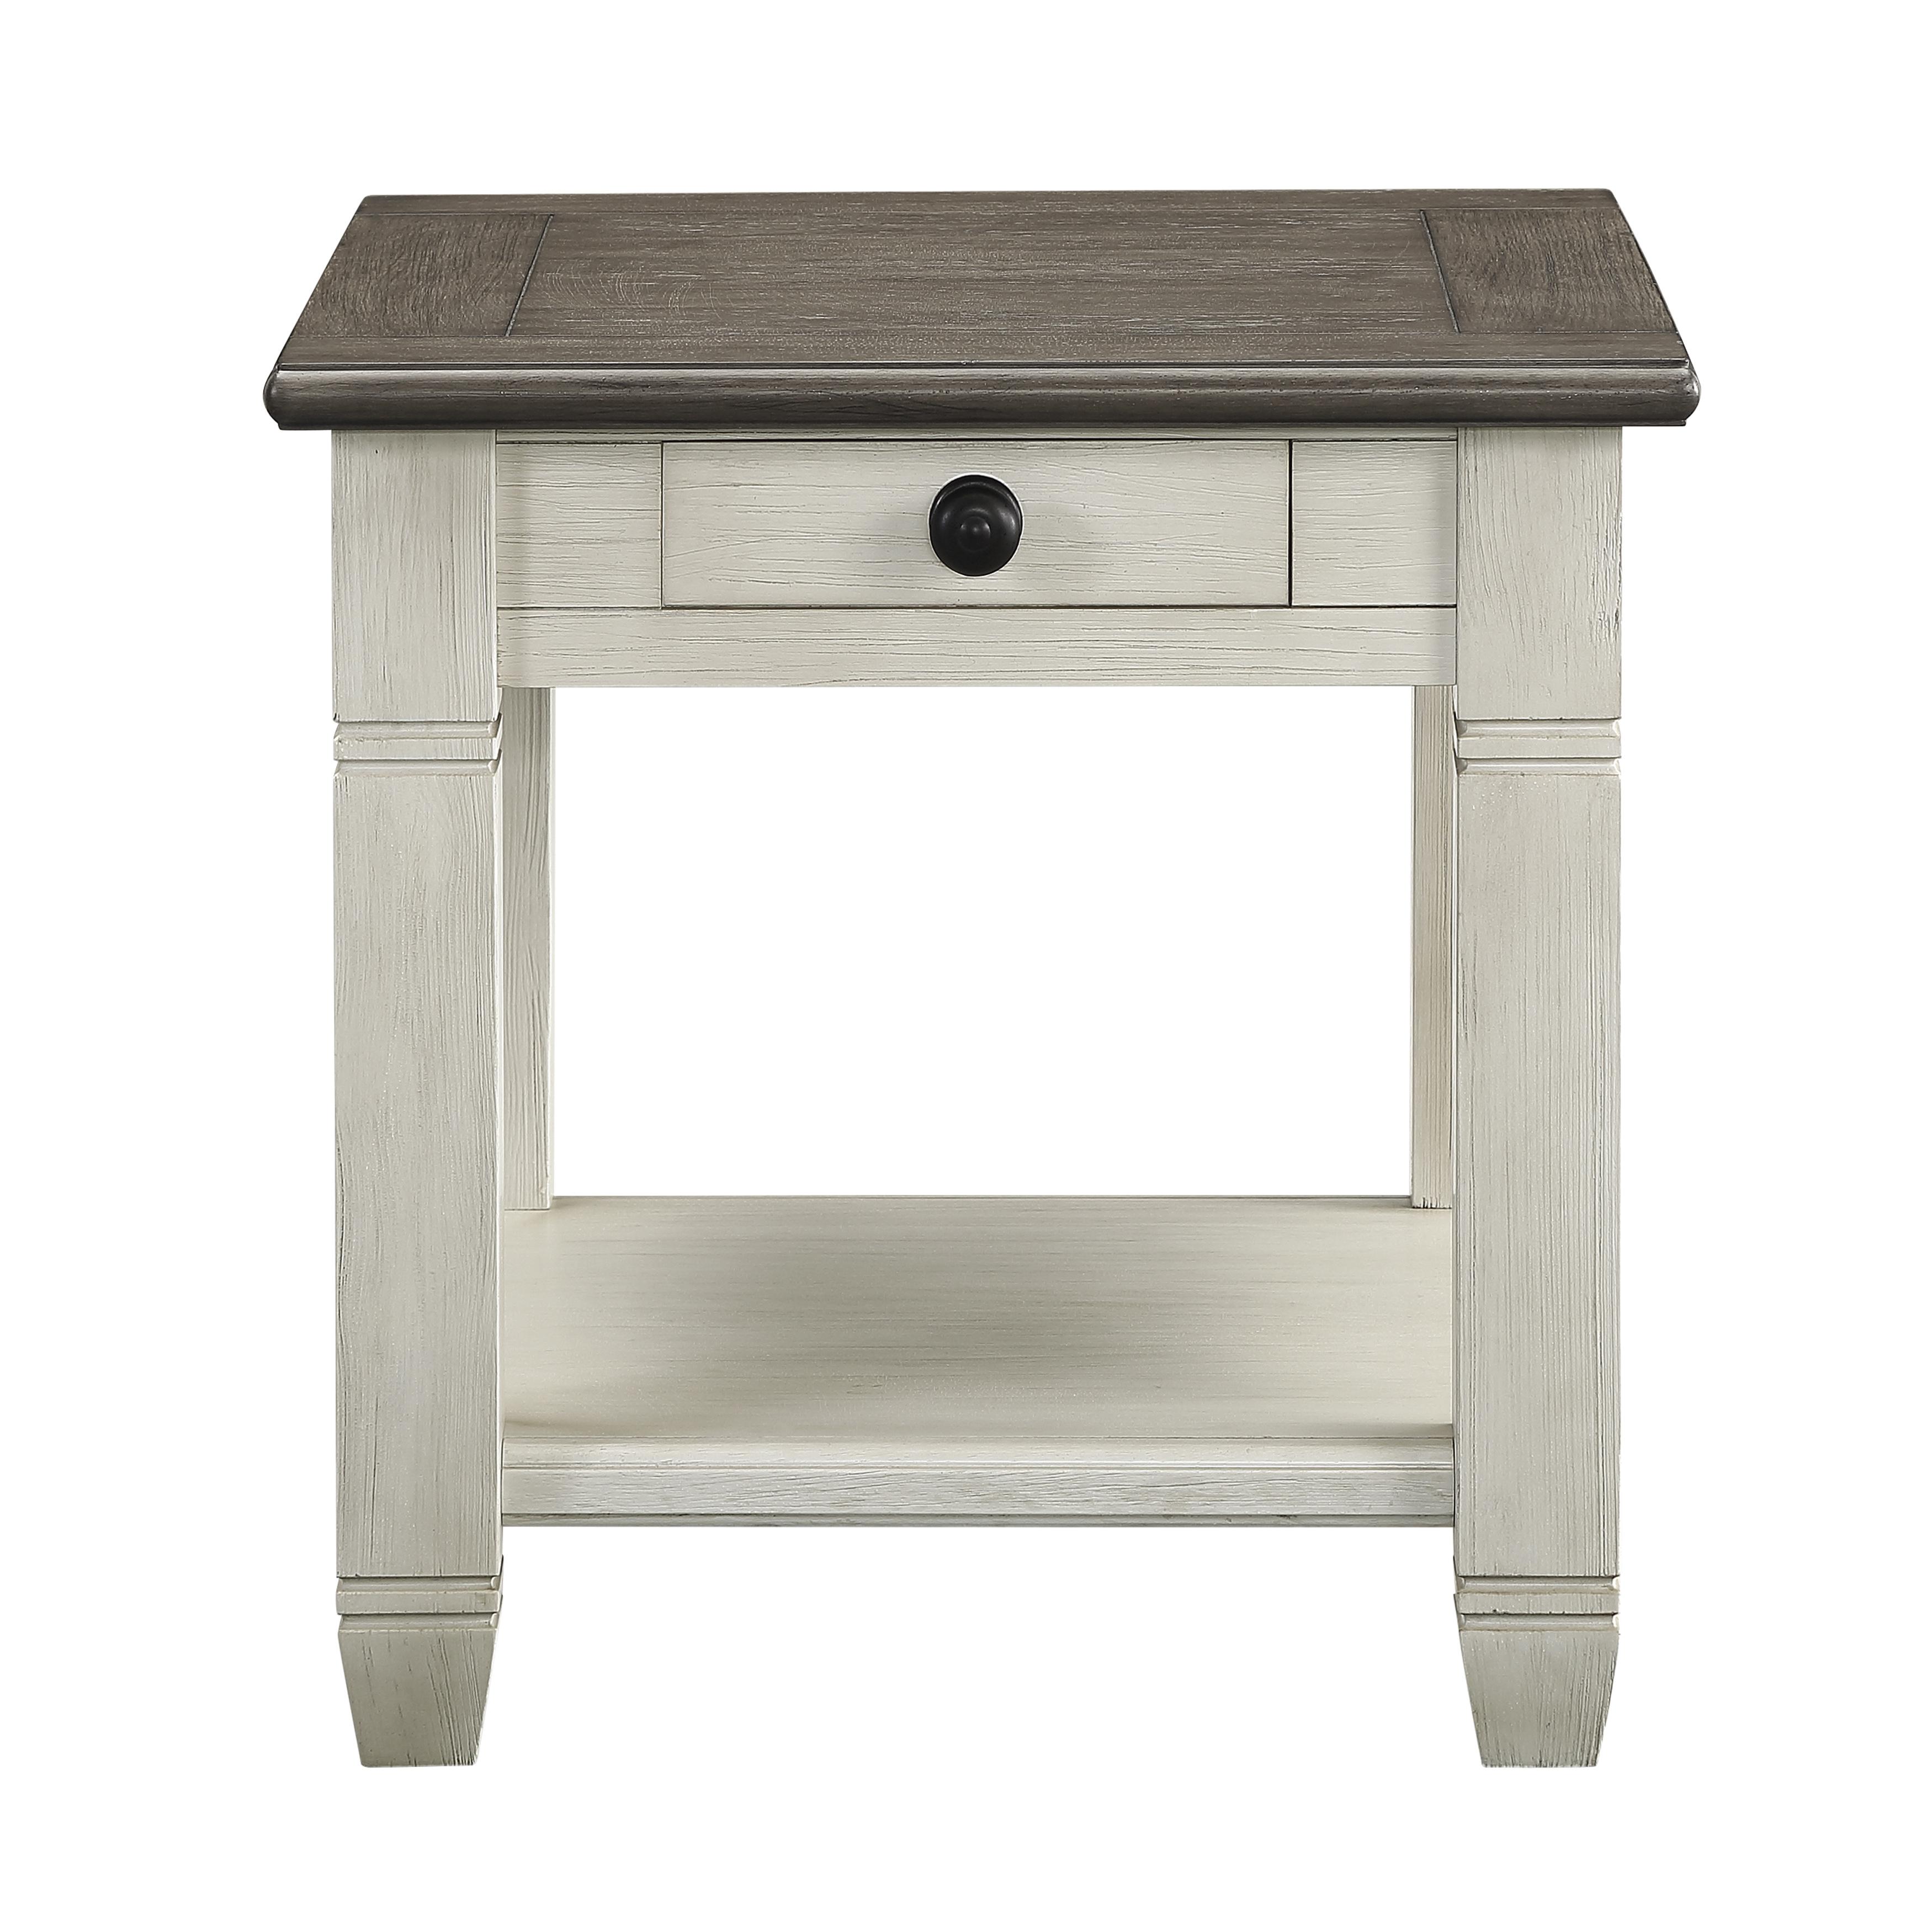 Homelegance 5627NW-04 Granby End Table